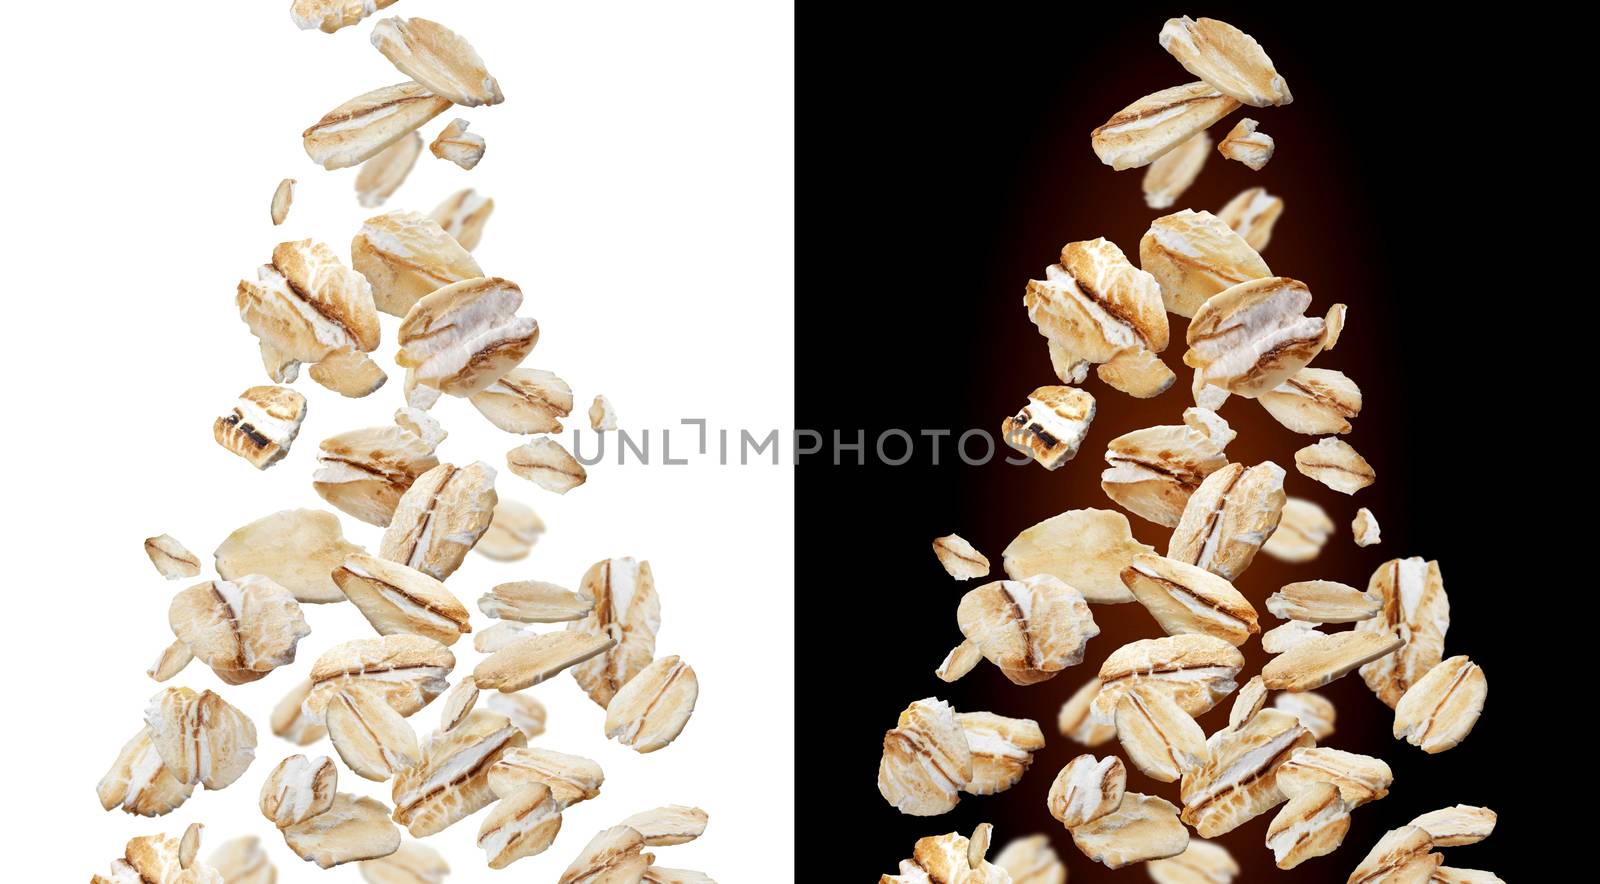 Oat flakes isolated on white and black backgrounds by xamtiw